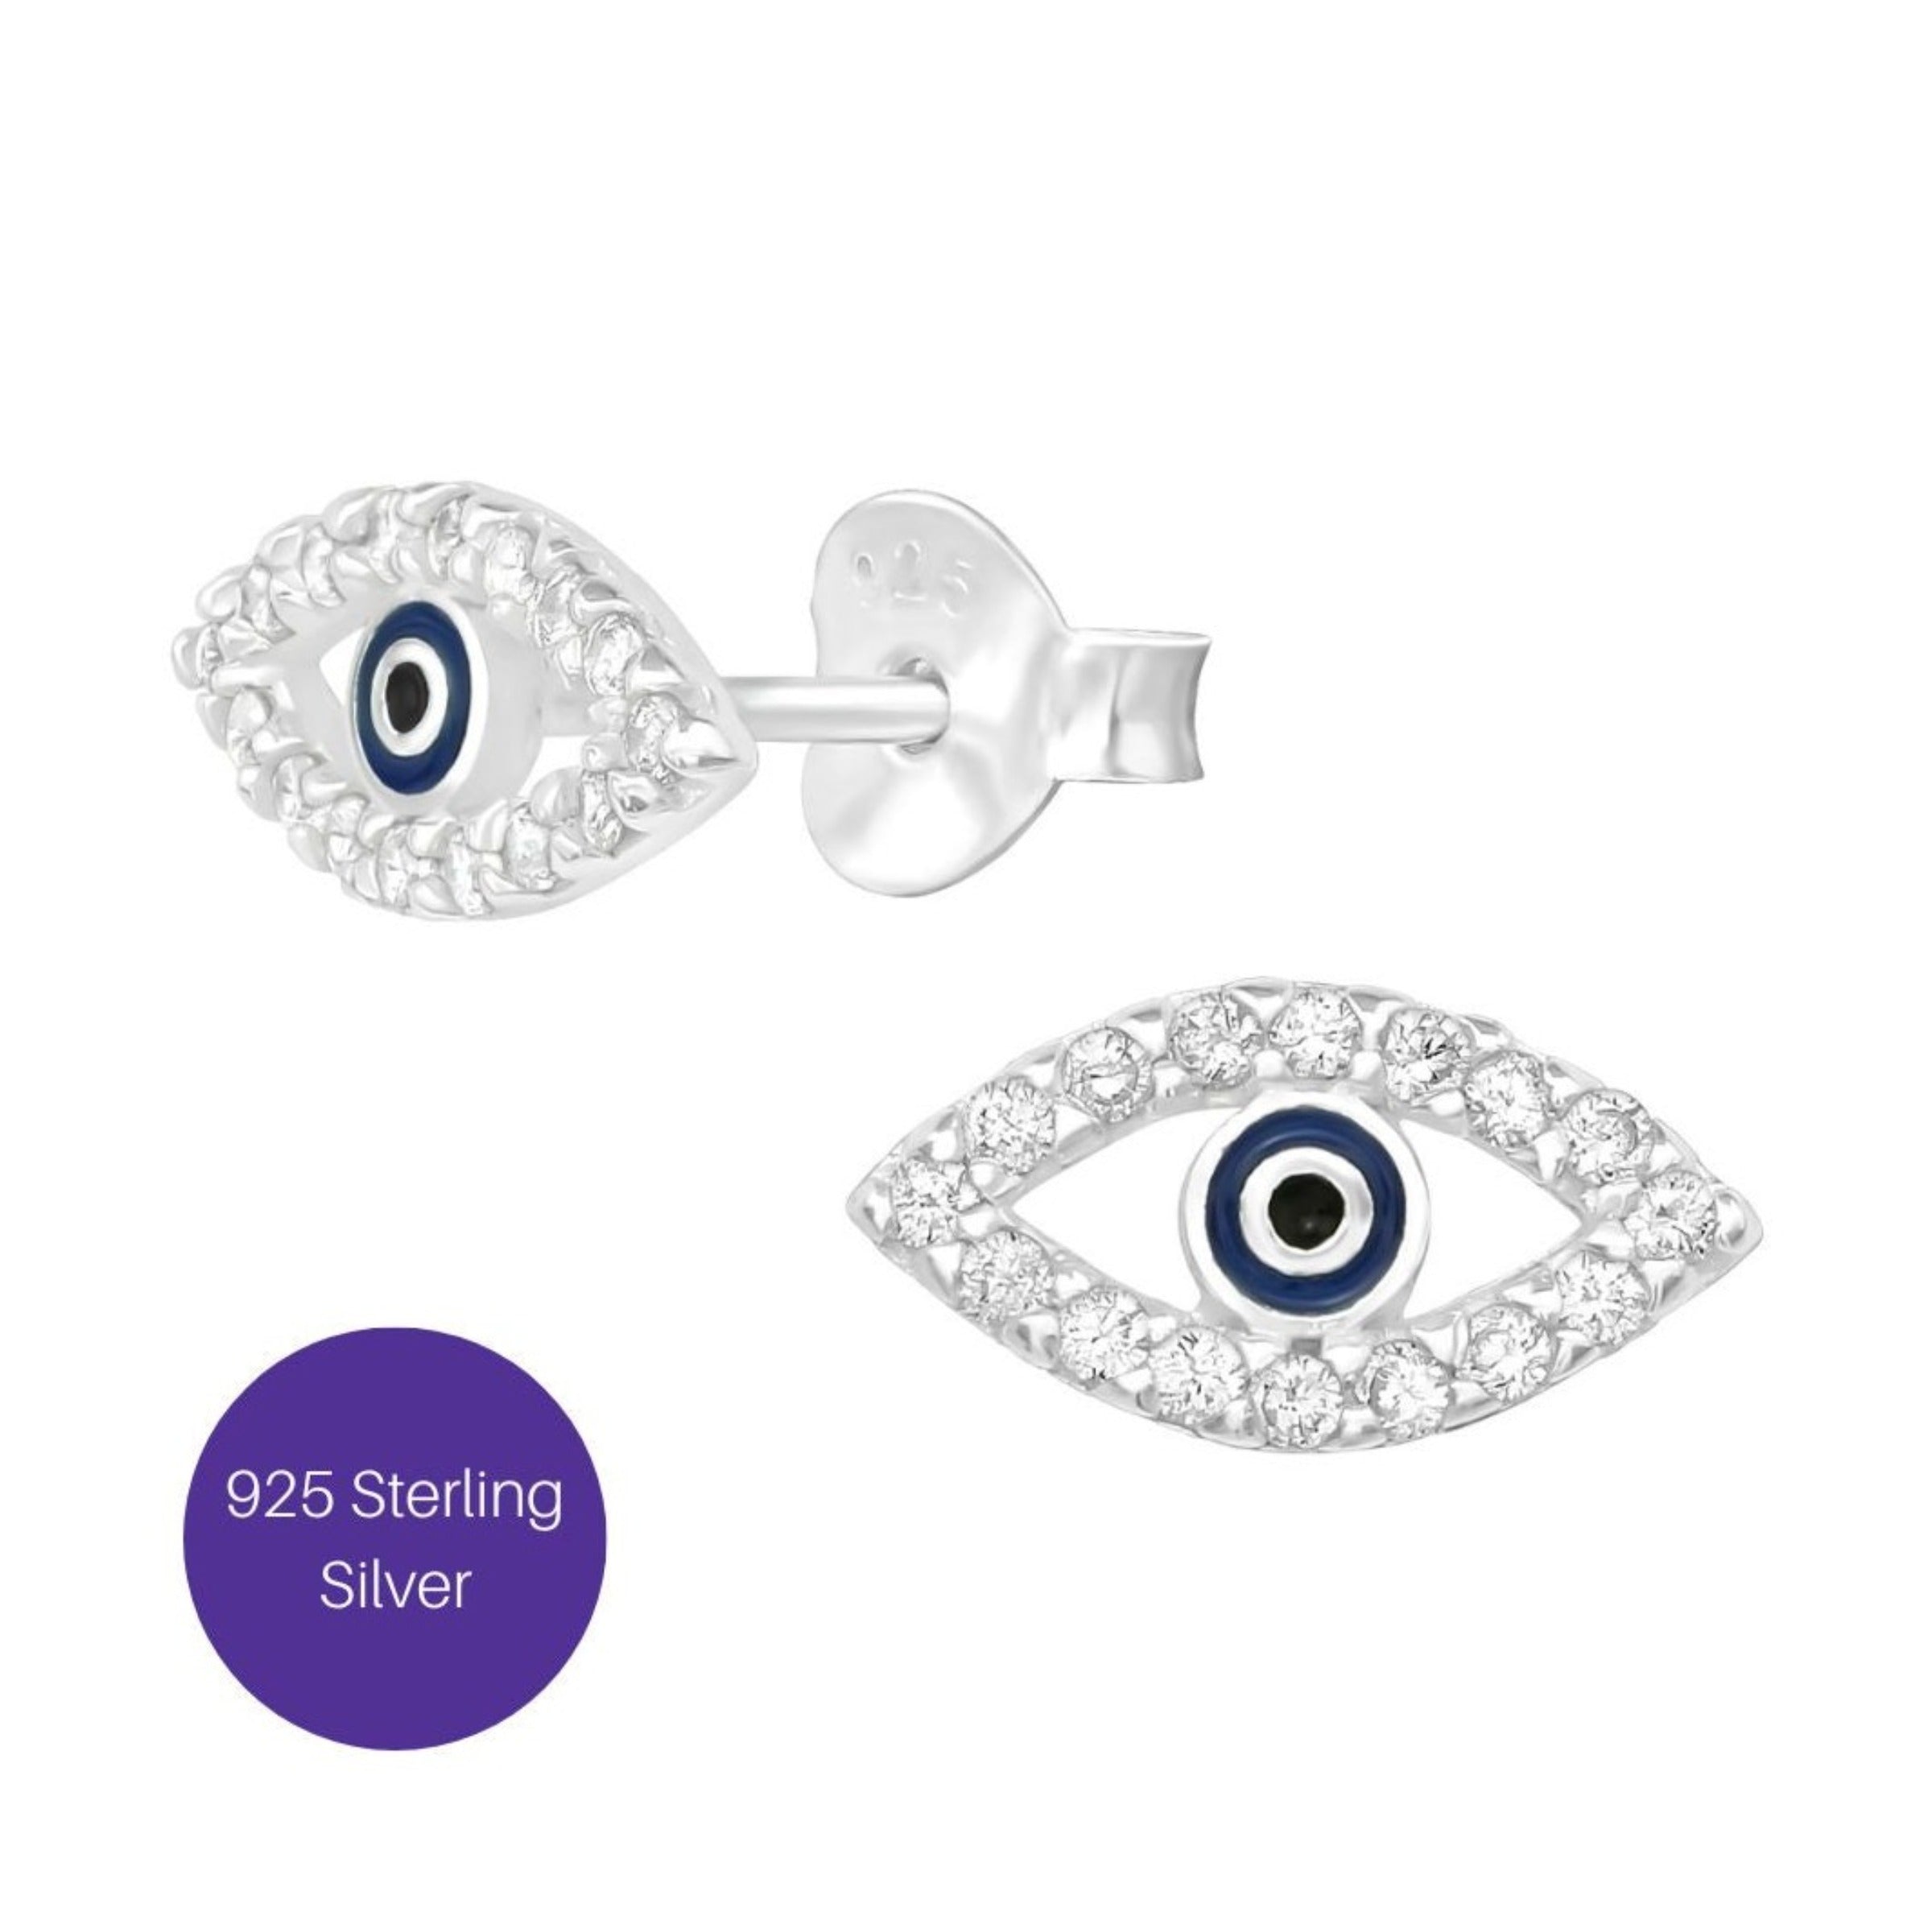 Protective Eye Stud Earrings Besom Boutique